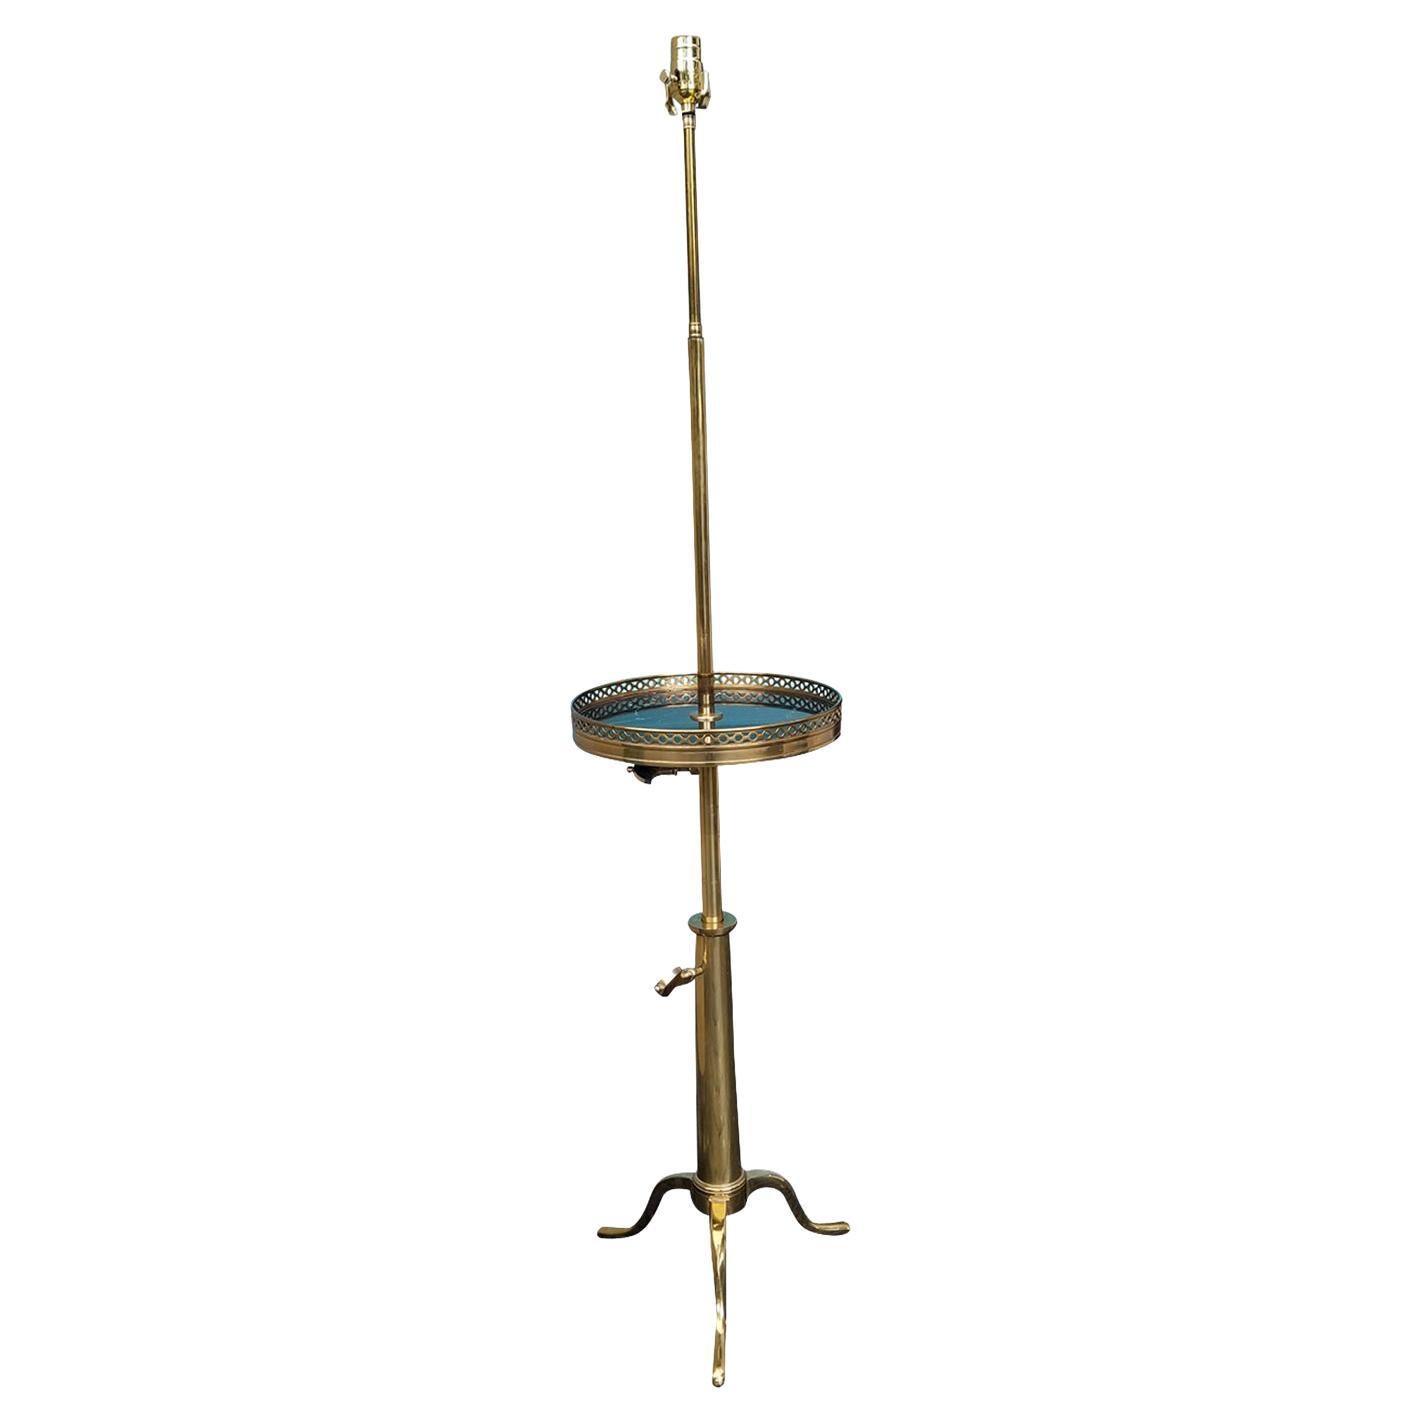 Style of Maison Toulouse Brass Floor Lamp with Marble Top Table, Brass Gallery For Sale